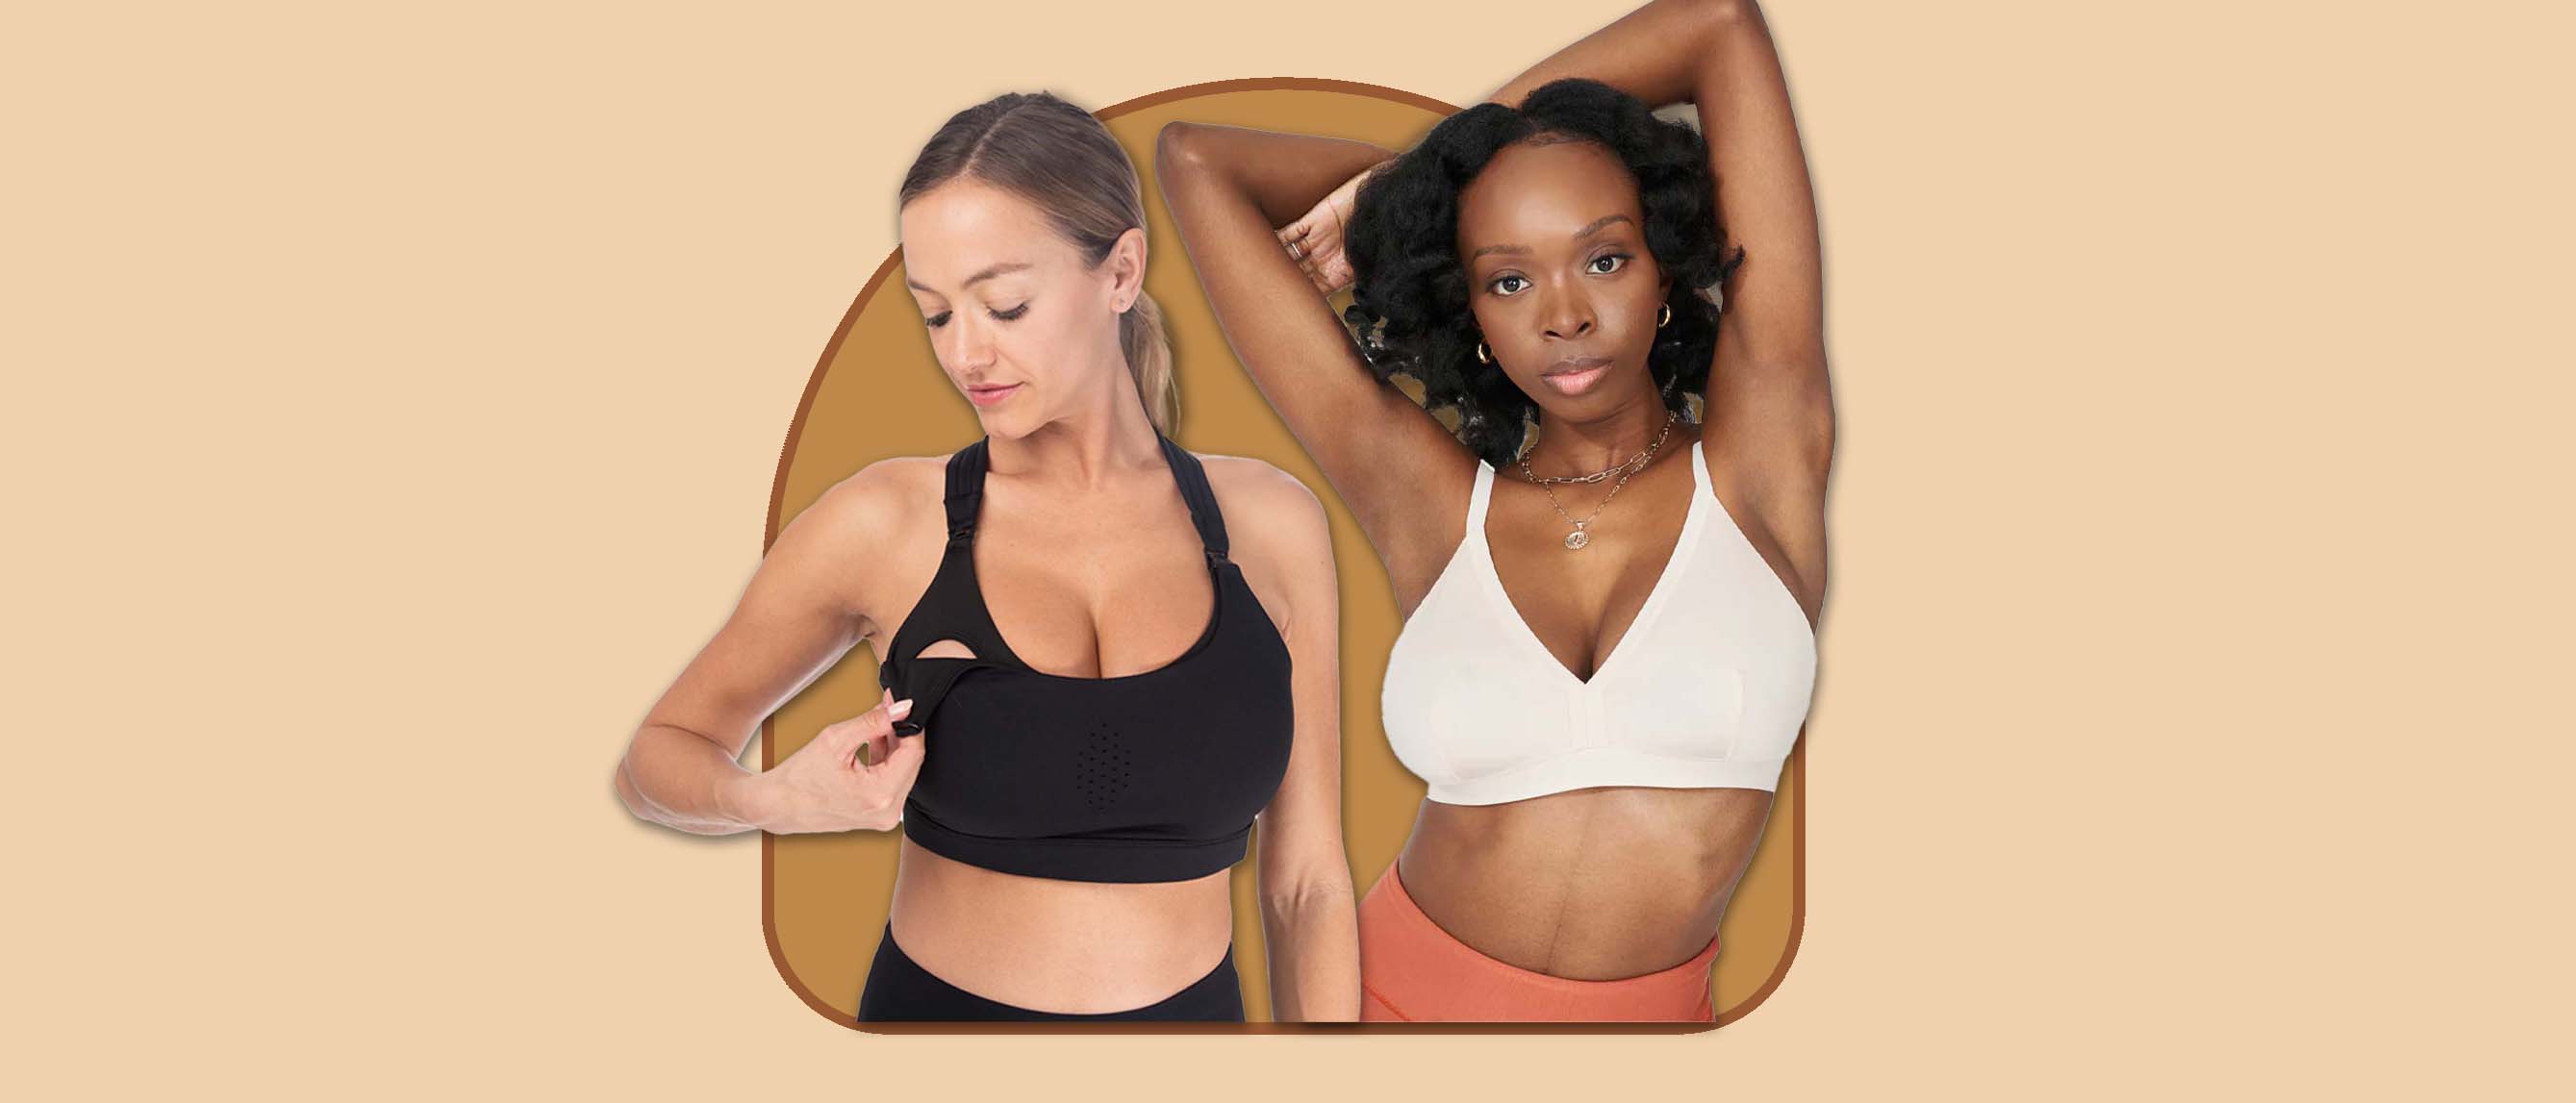 two models wearing nursing bras, one scoop bra with detachable fabric and one white low v-neck bra